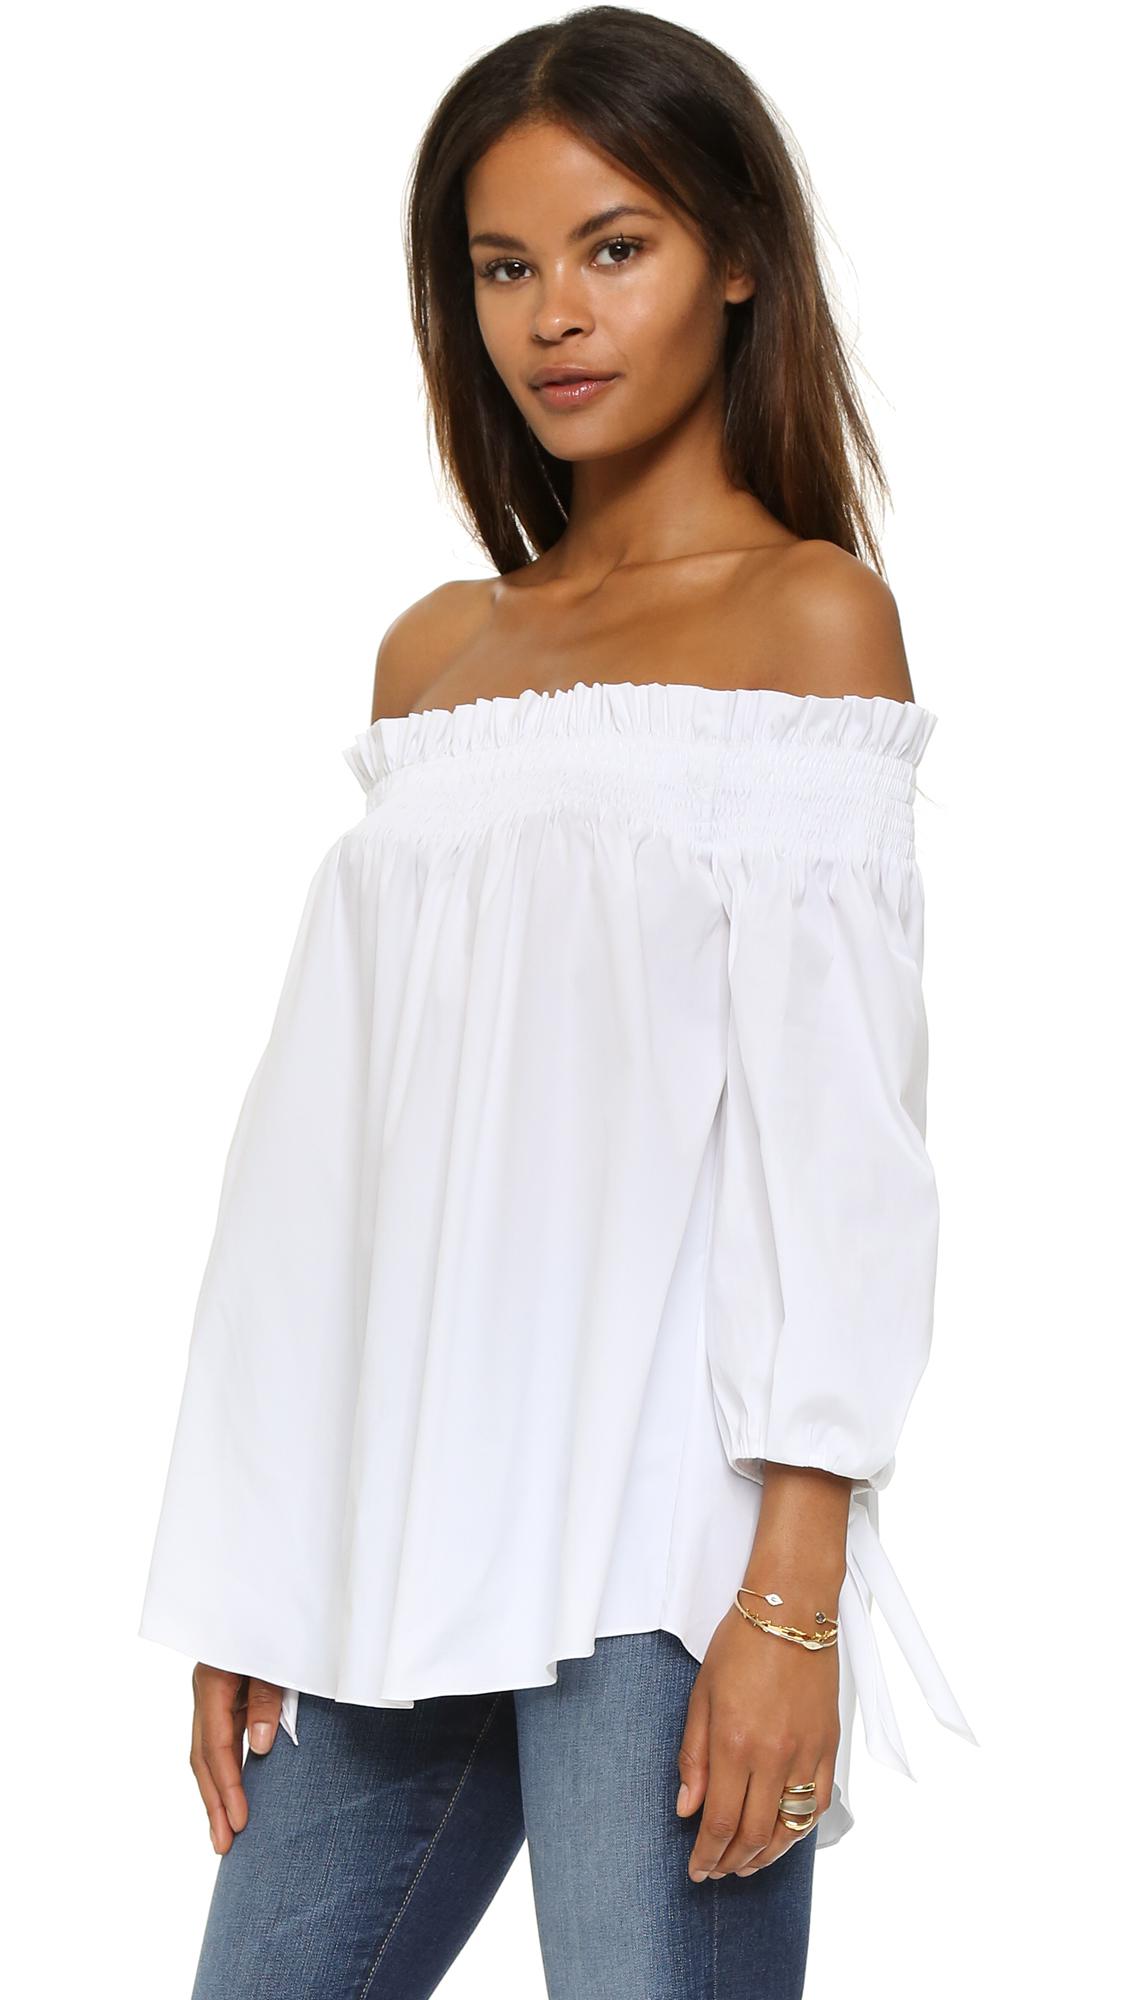 Lyst - Caroline Constas Lou Off The Shoulder Blouse in White - Save 31%